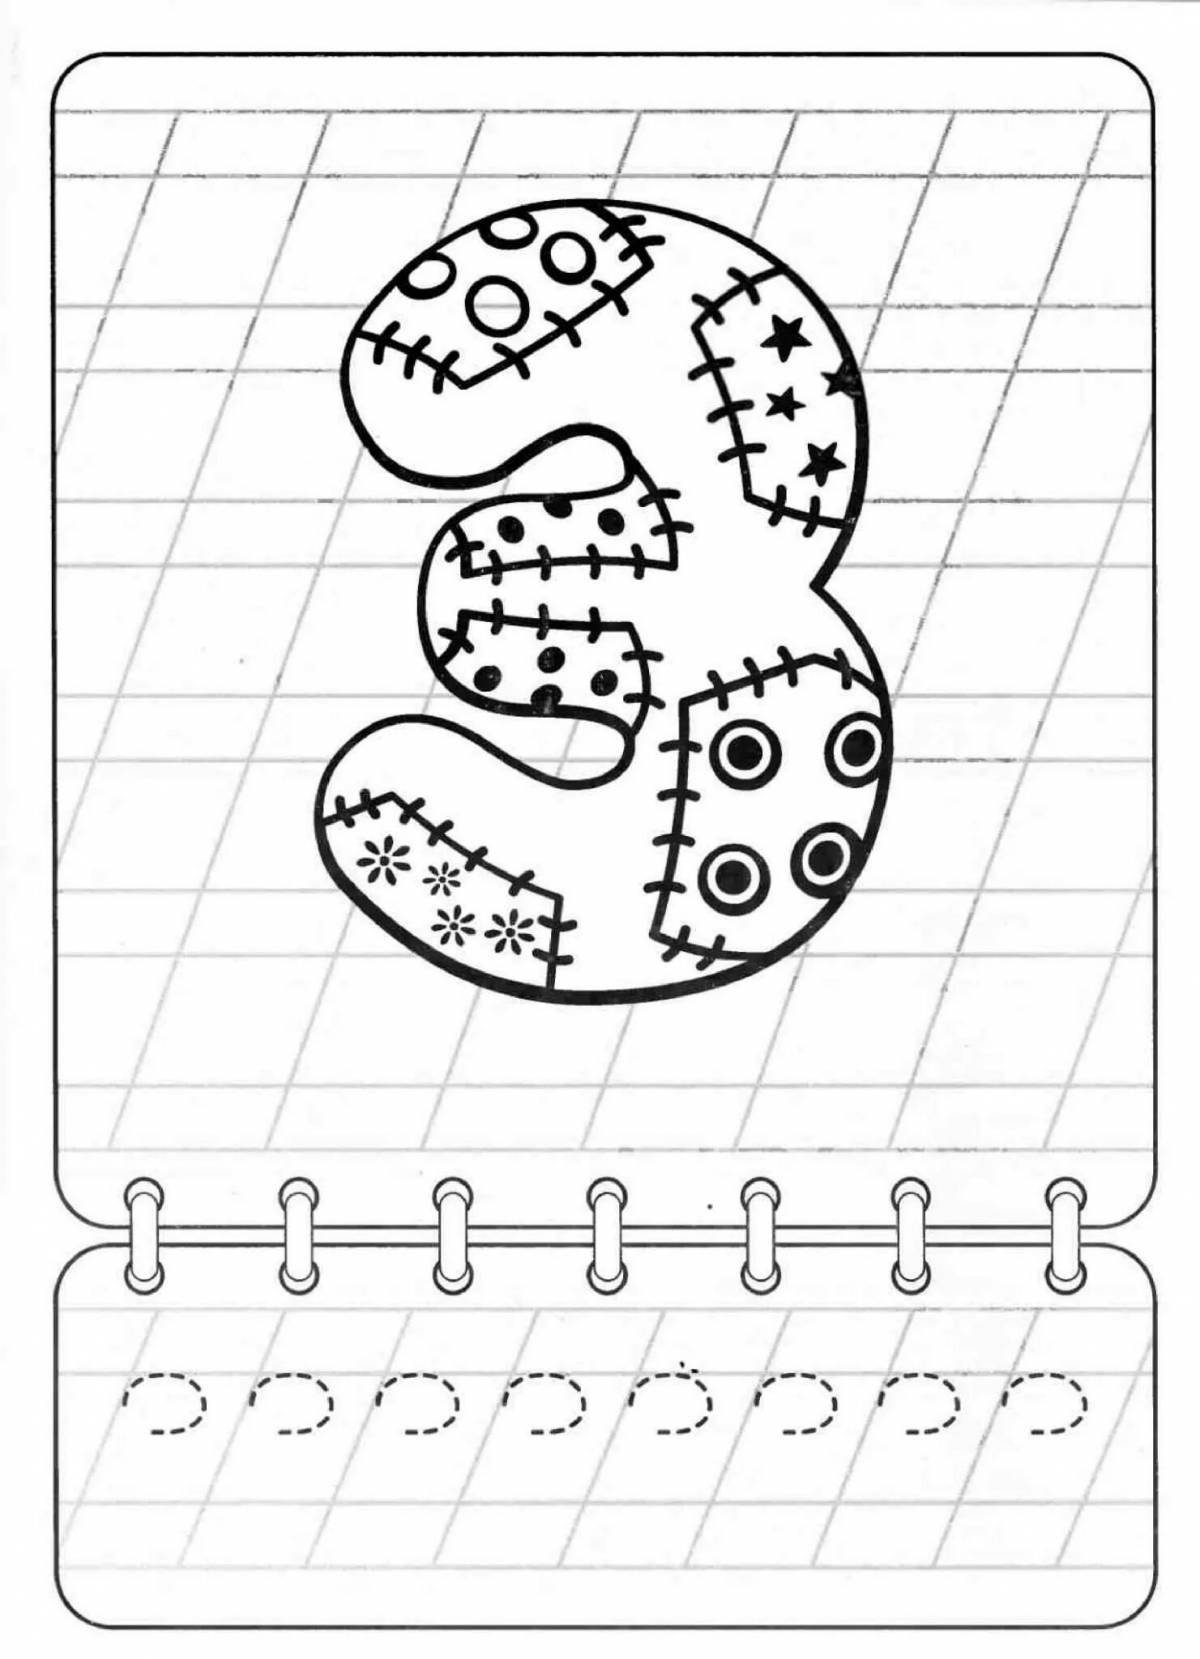 Coloring pages letter z for preschoolers